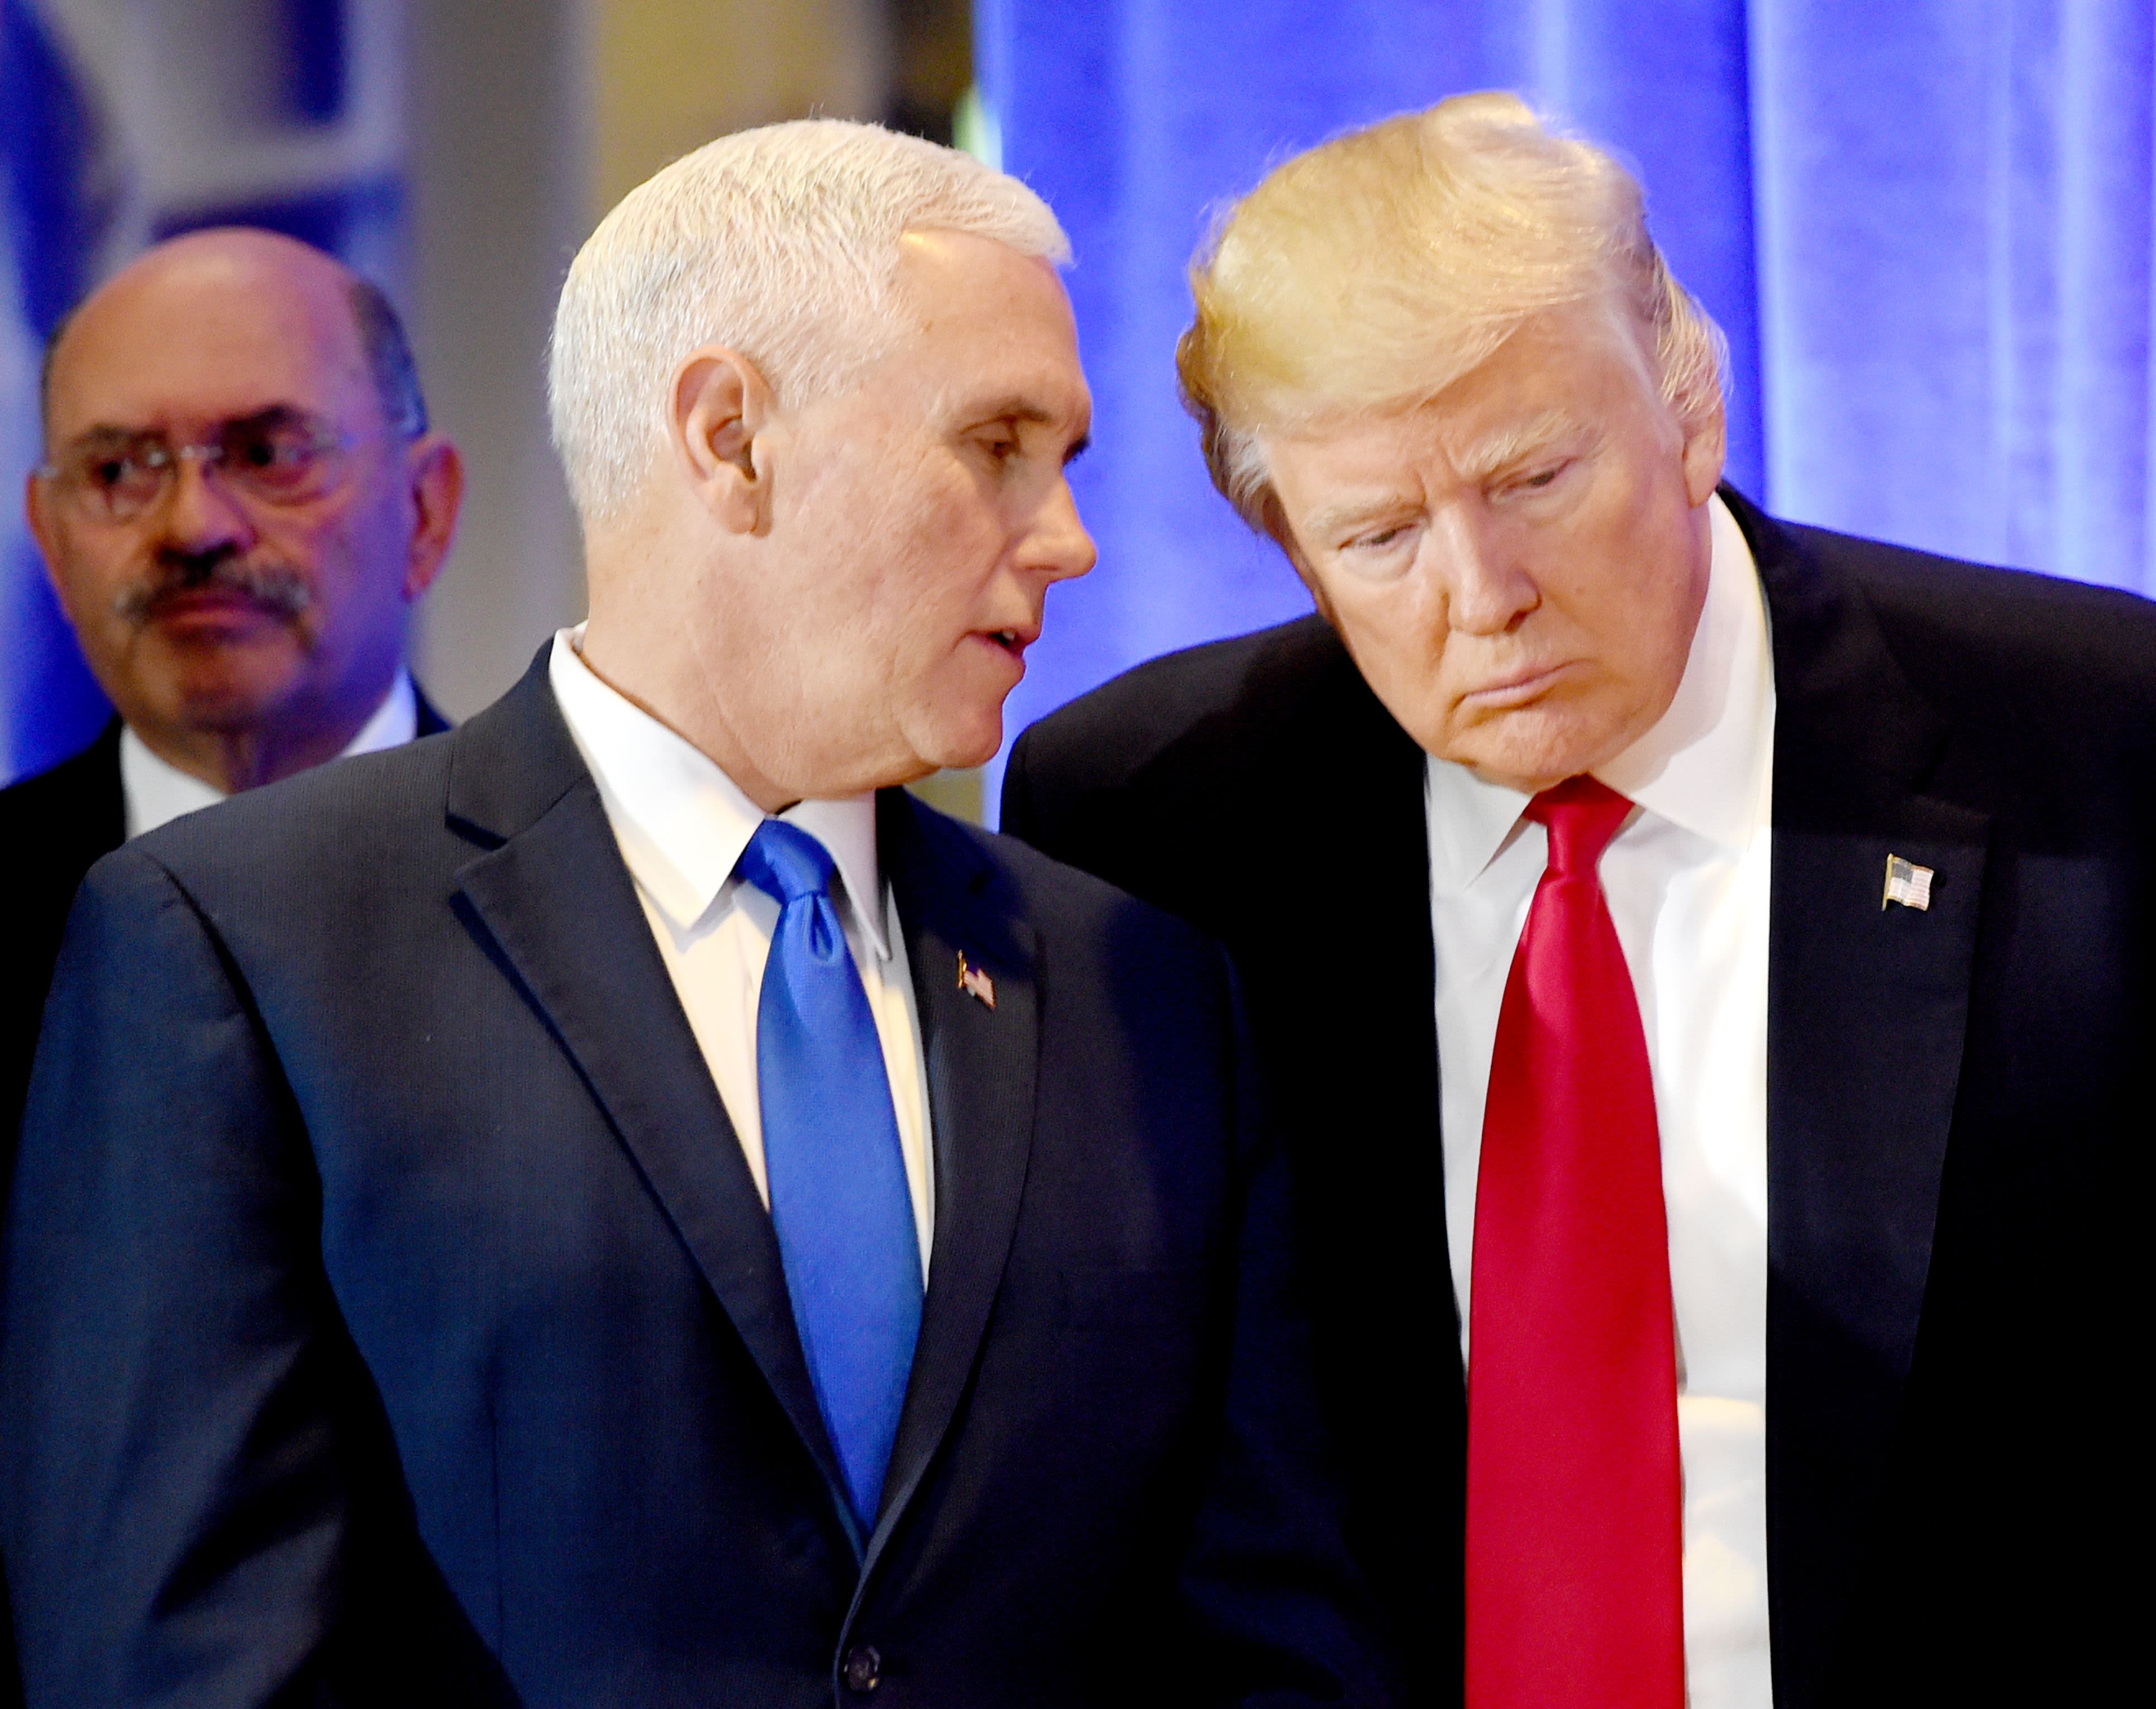 Mike Pence will damage Trump more than Michael Cohen: former Trump aide